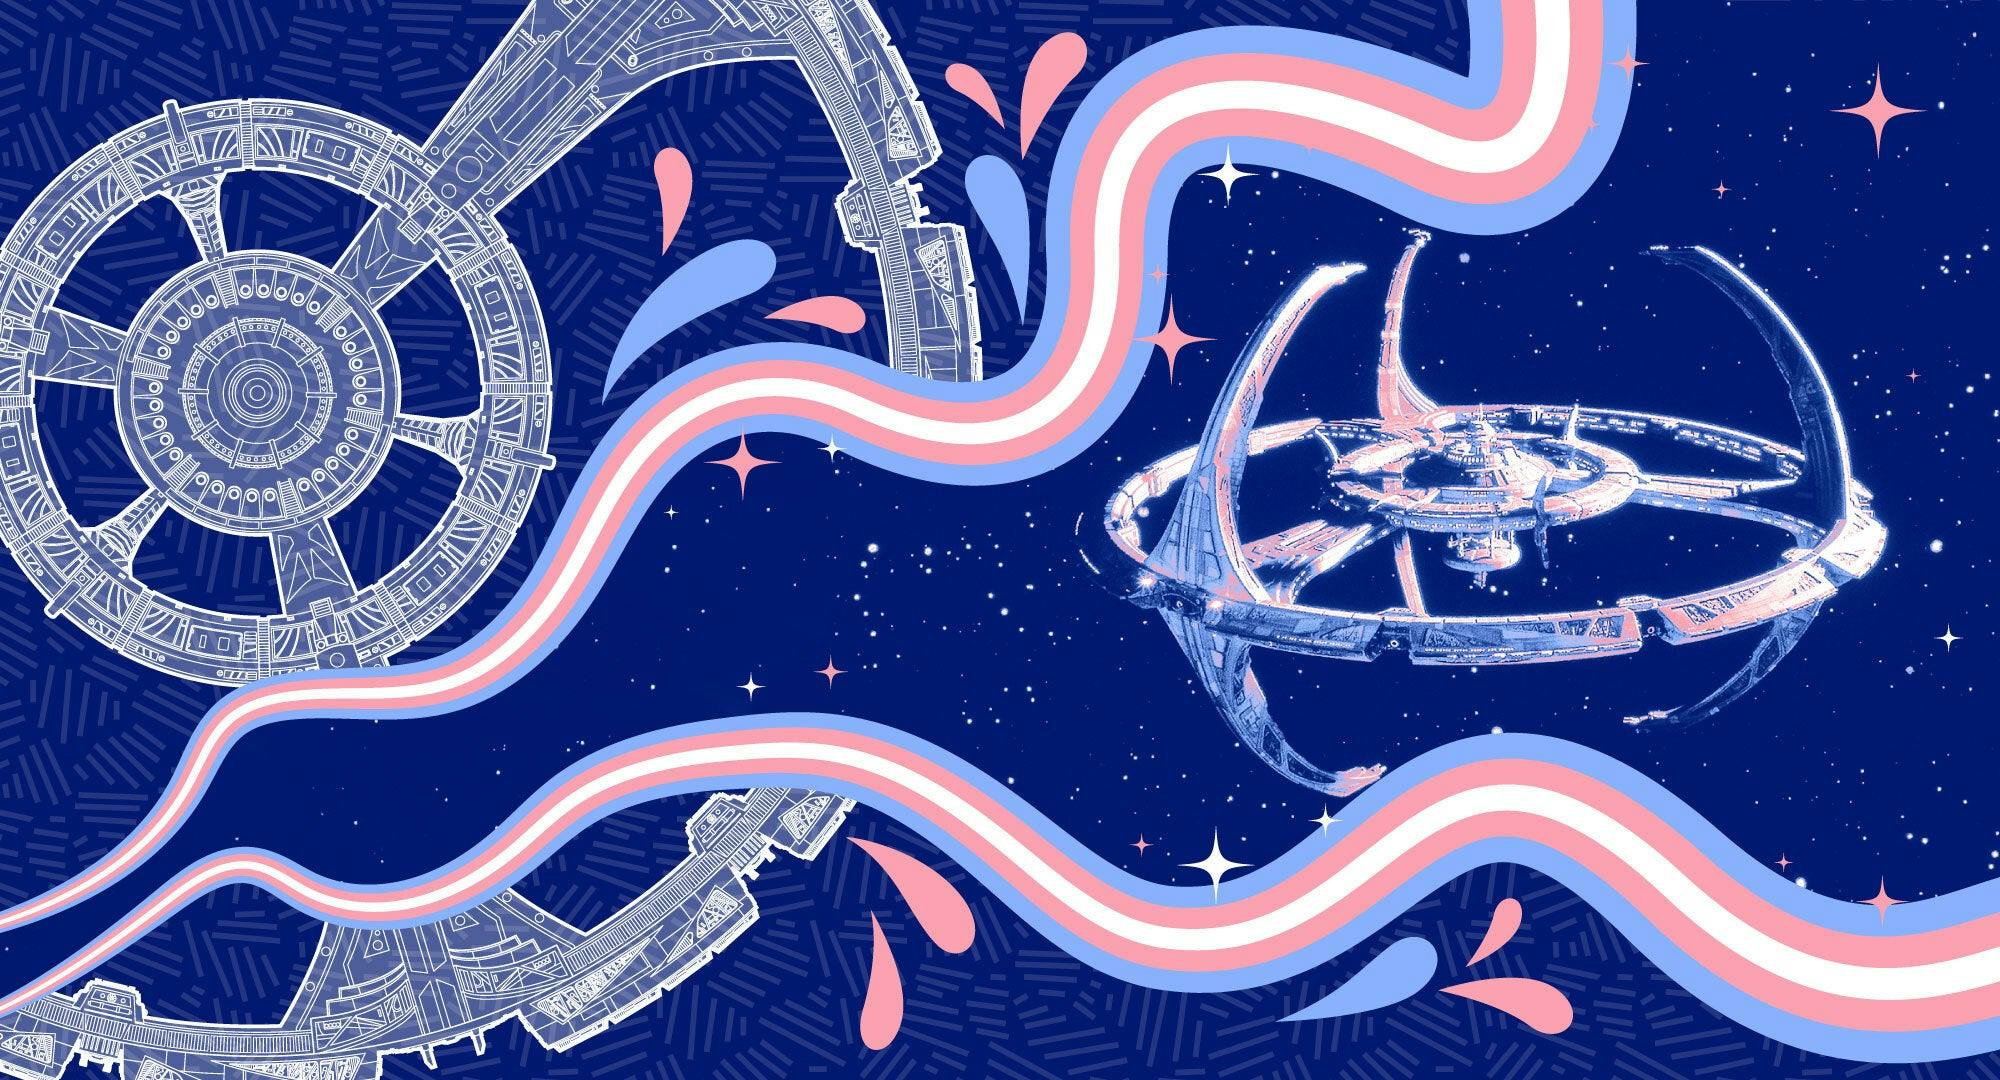 Illustrated banner featuring the Deep Space 9 spacestation